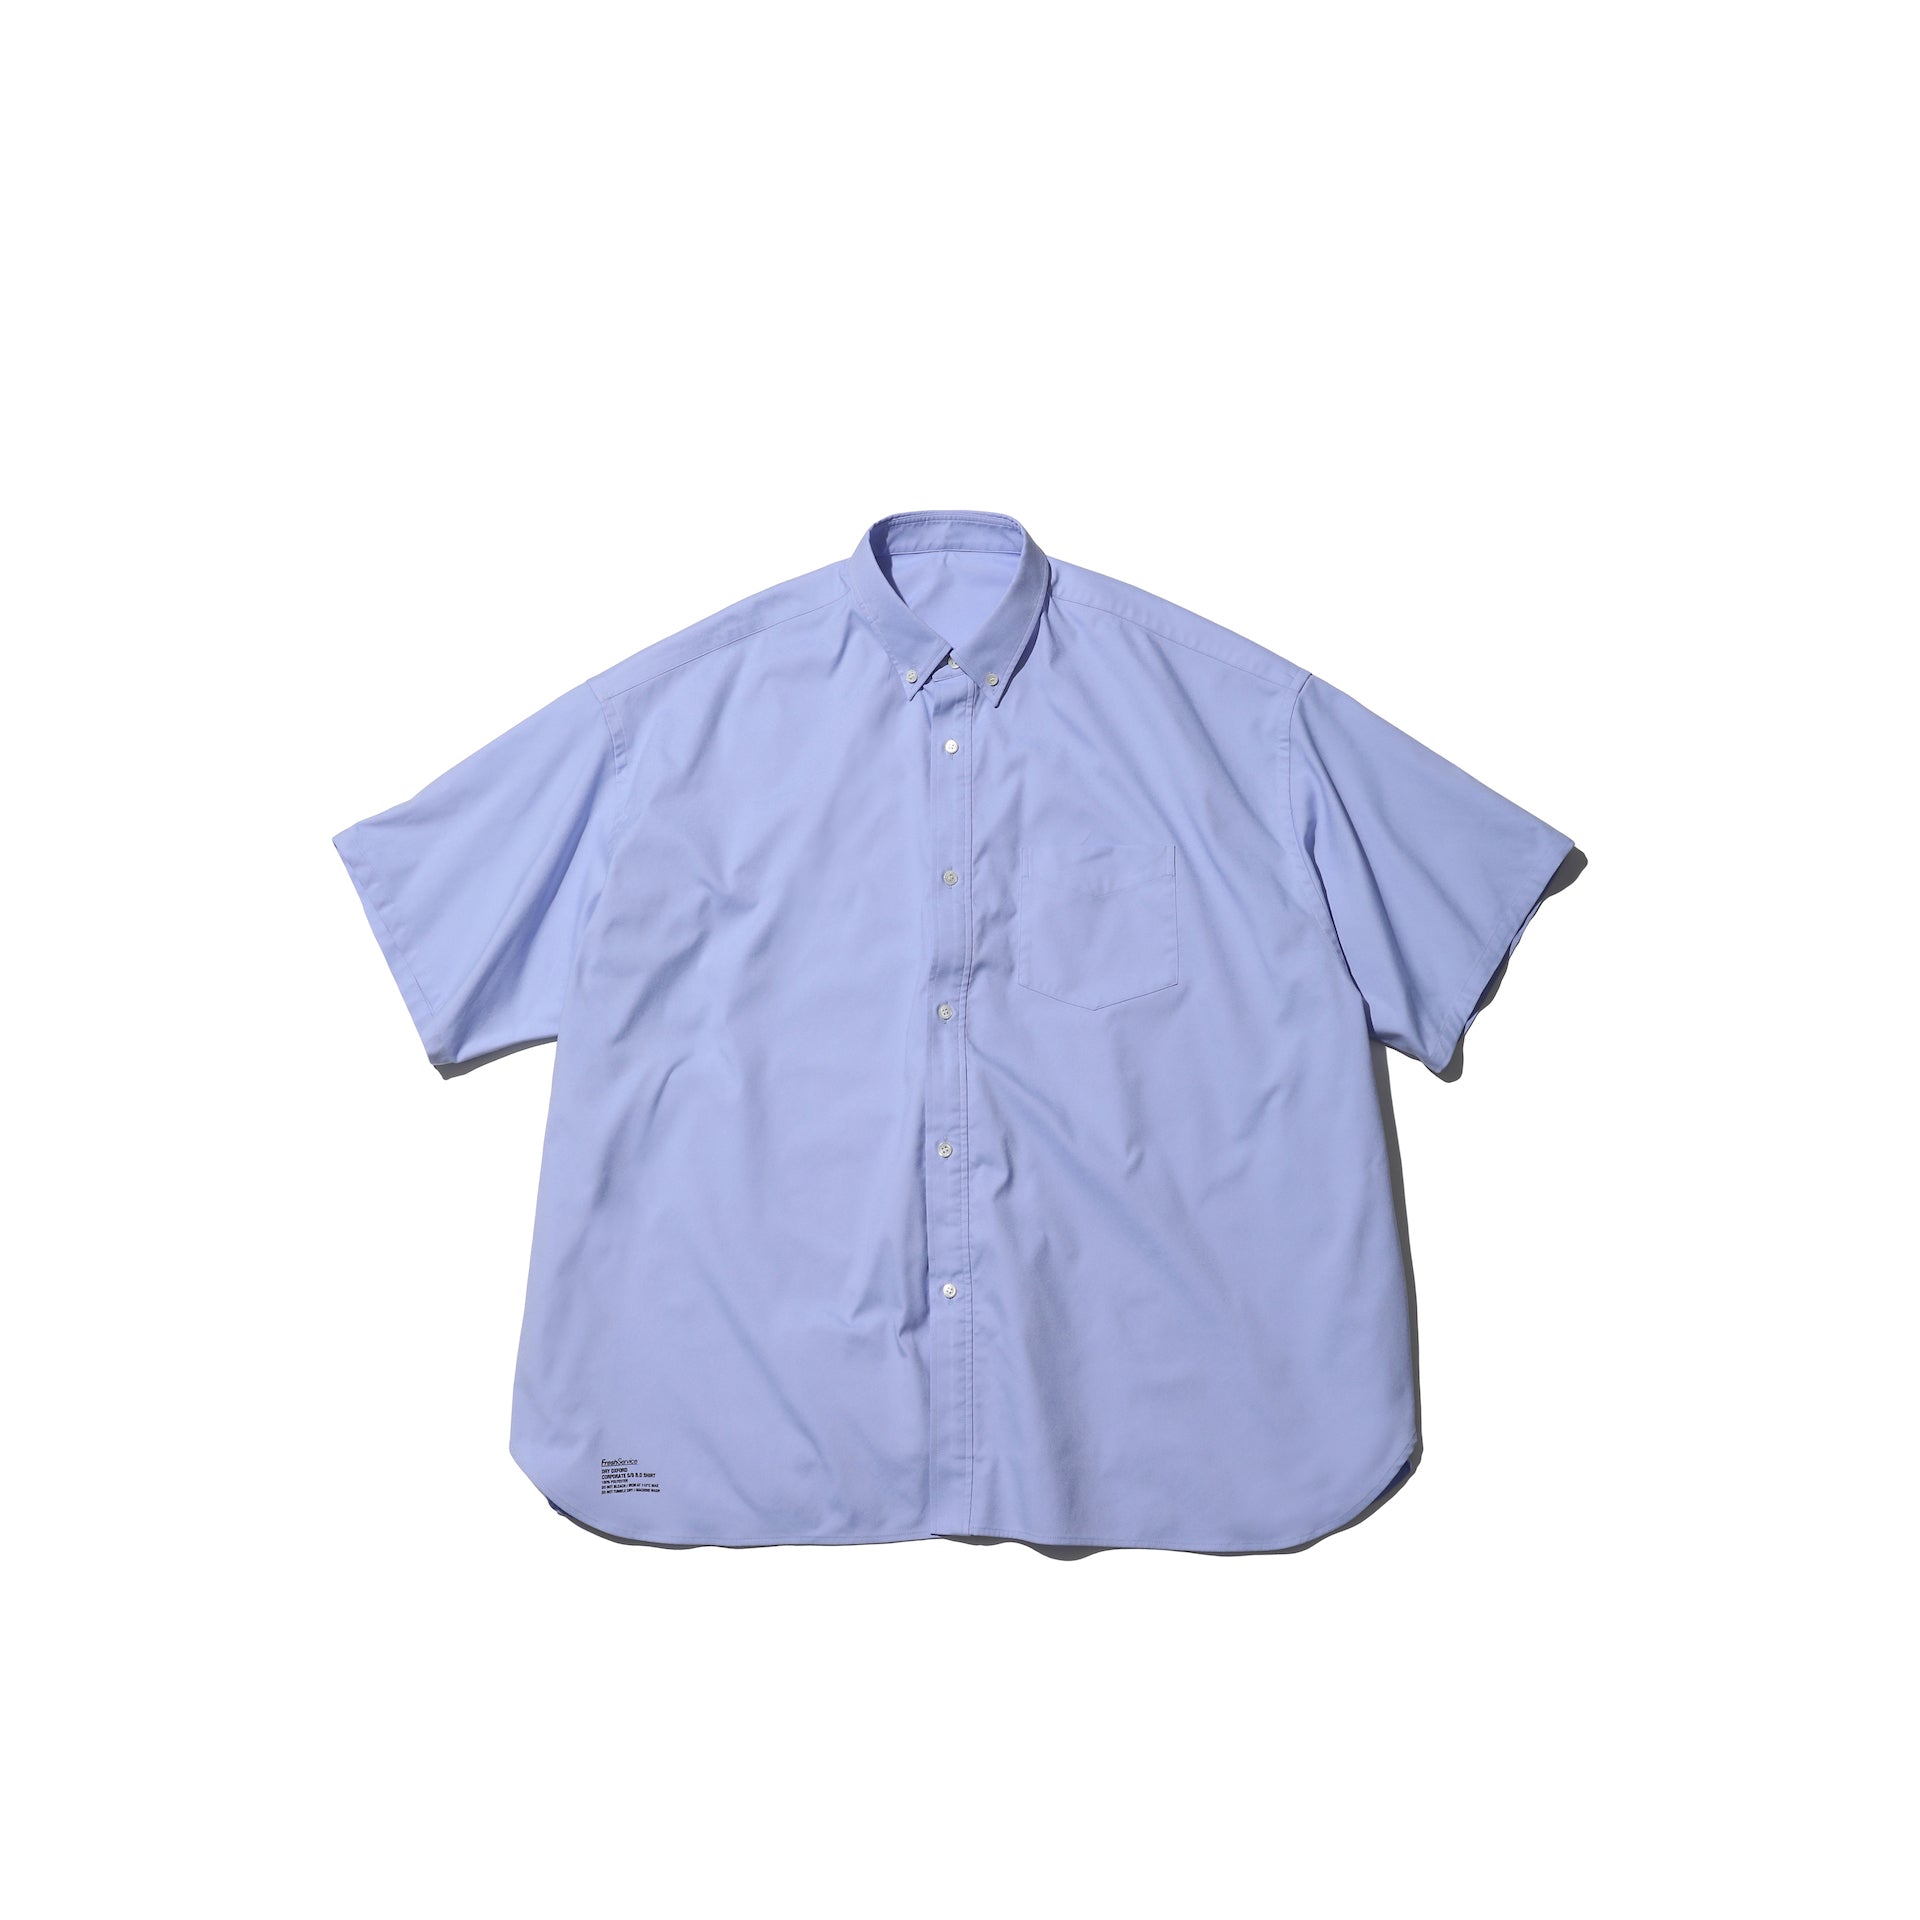 DRY OXFORD CORPORATE S/S B.D. SHIRT – FreshService® official site